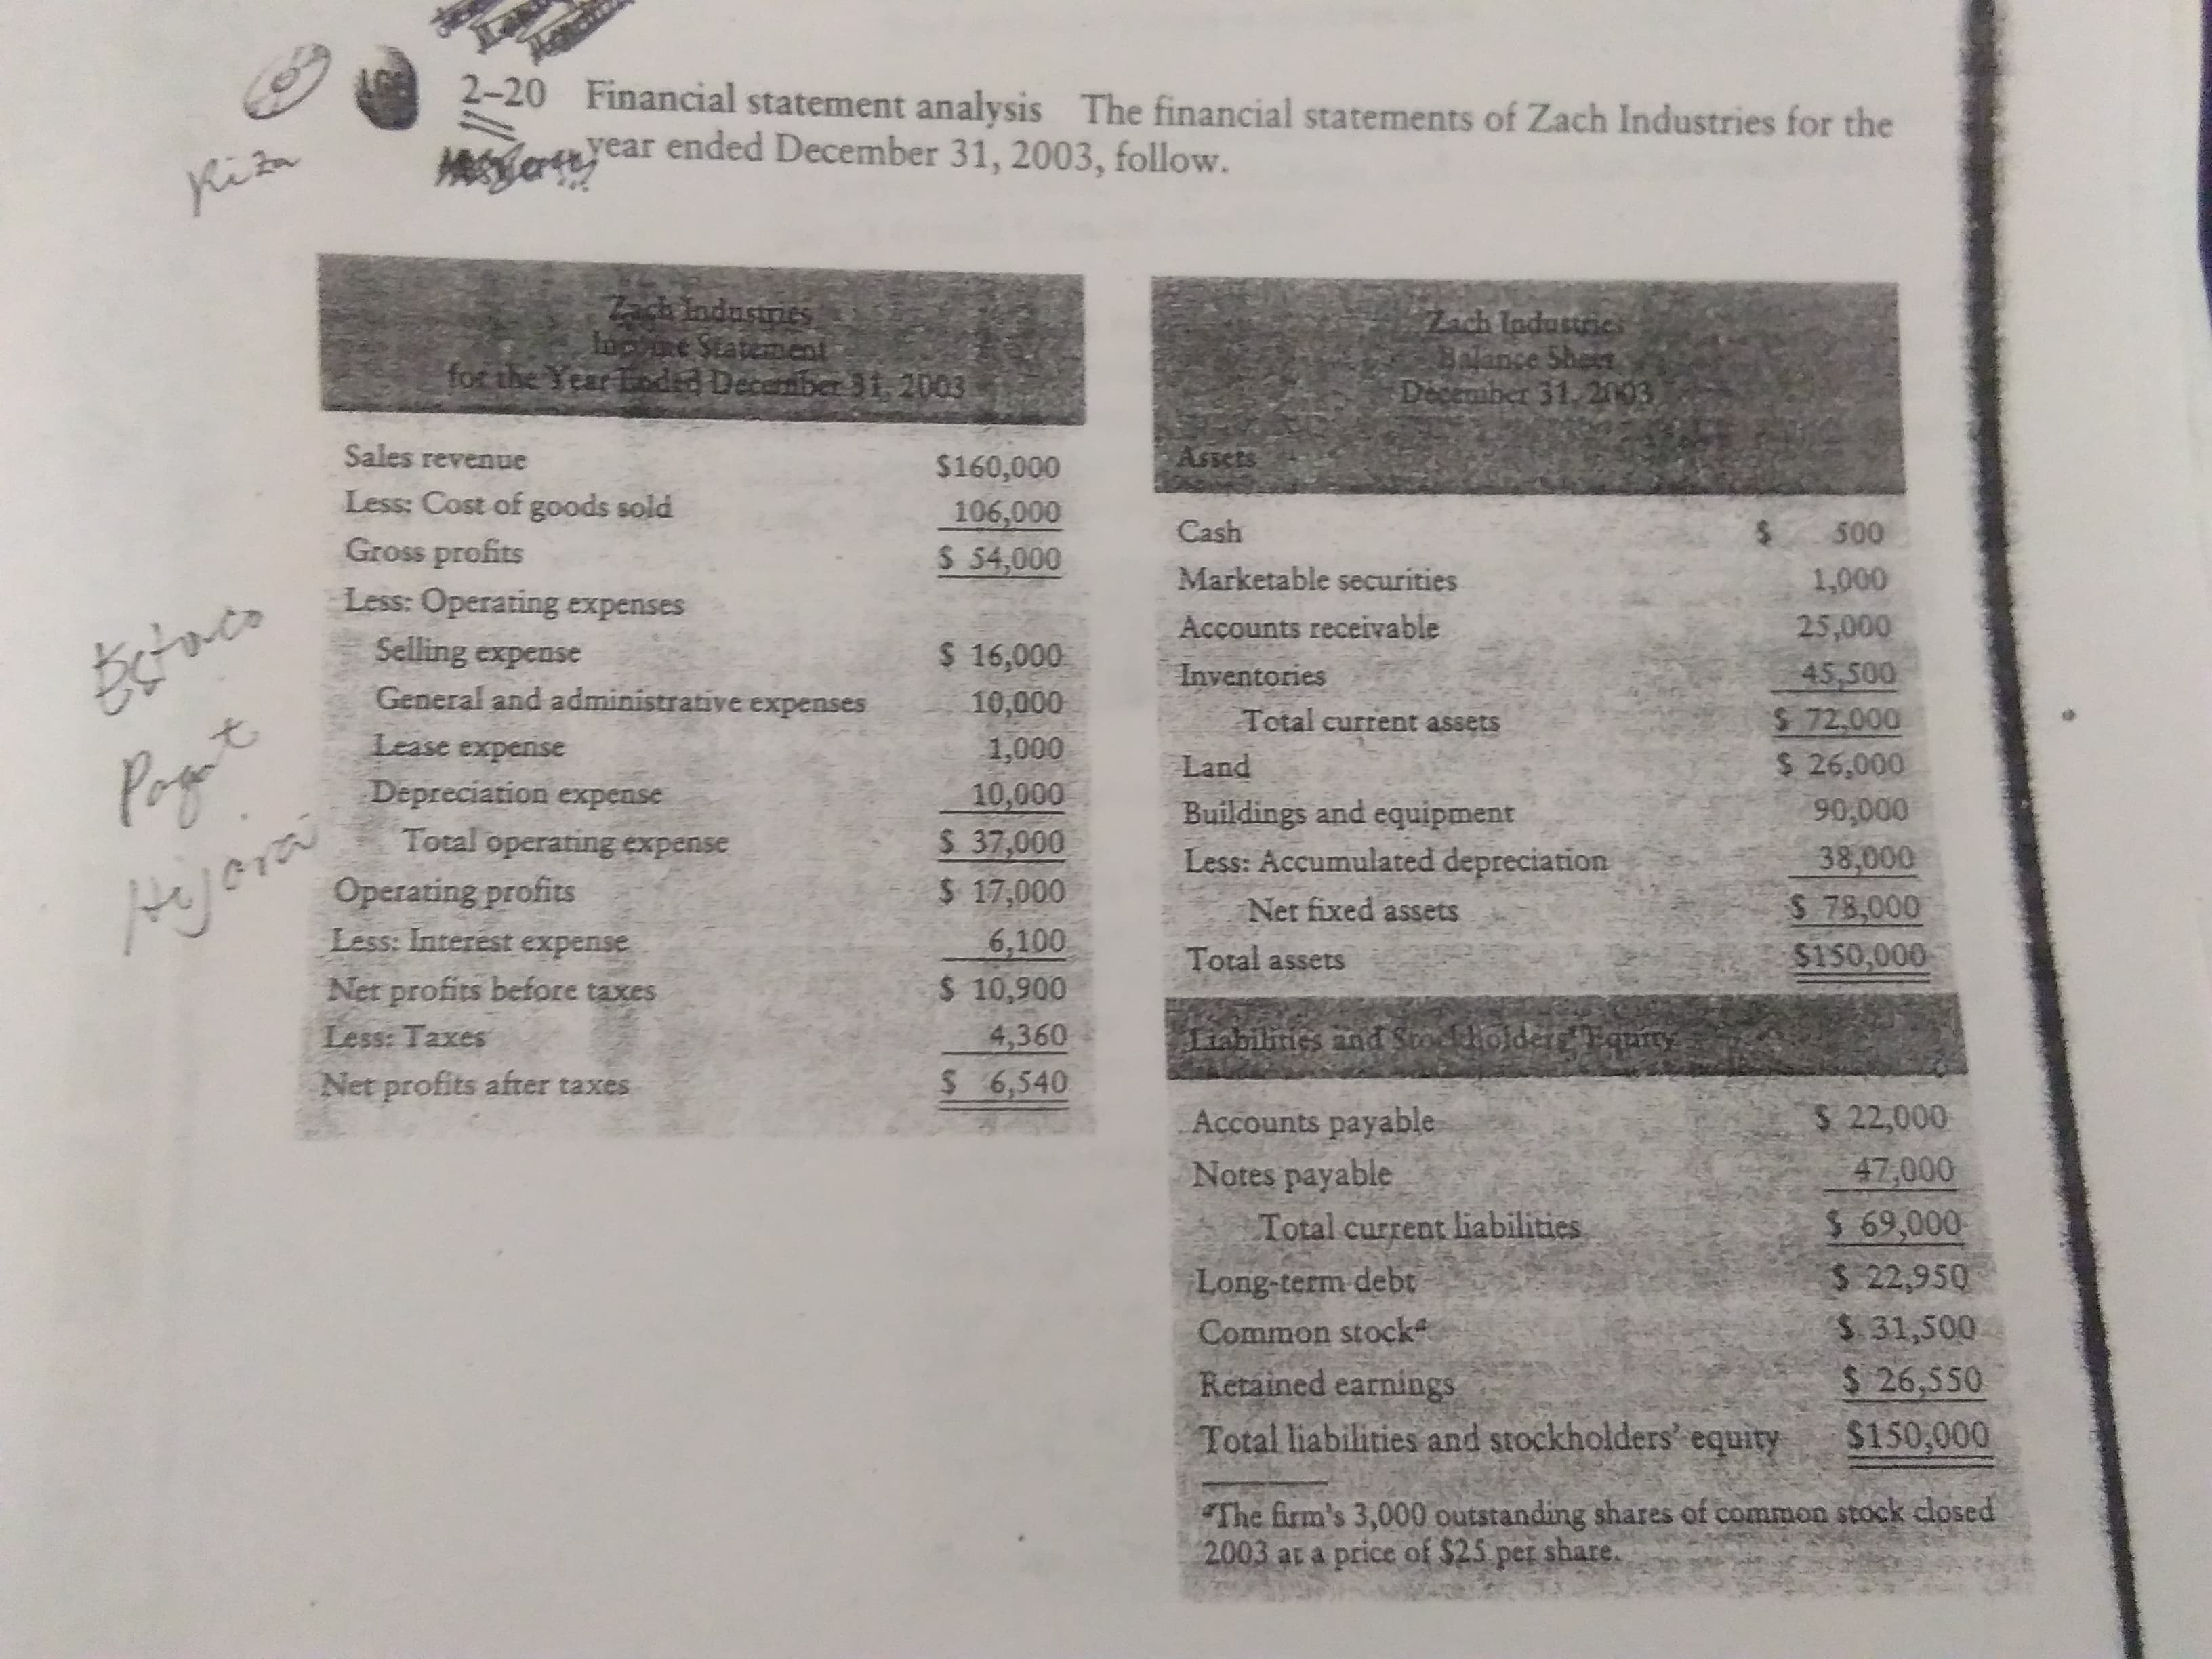 2-20 Financial statement analysis The financial statements of Zach Industries for the
year ended December 31, 2003, follow.
Kiza
Zach ladustics
for the Year oded December 31,2003
December 31, 2003
Sales revenue
$160,000
$233S
Less: Cost of goods sold
000'901
Cash
Gross profits
$ 54,000
00S
Marketable securities
Less: Operating expenses
Accounts receivable
$ 16,000
00000
Selling expense
Inventories
45,500
000'0
0000 0
General and administrative expenses
Total current assets
Lease expense
pur
Buildings and equipment
to
000
Depreciation expense
Total operating expense
$ 37,000
Less: Accumulated depreciation
38,000
000 0
6,100
Operating profits
Net fixed assets
$ 78,000
Less: Interést expense
Total assetS
Net profits before taxes
4,360
Liabilines and Stockliolderg Fquity
Less: Taxes
Net profits after taxes
%246,540
Accounts payable
$ 22,000
Notes payable
Total current liabilities
$ 22,950
$ 31,500
Long-term debt
Common stock
Retained earnings
2426,550
Total liabilities and stockholders' equity
The firm's 3,000 outstanding shares of common stock closed
2003 at a price of $25 per share.
